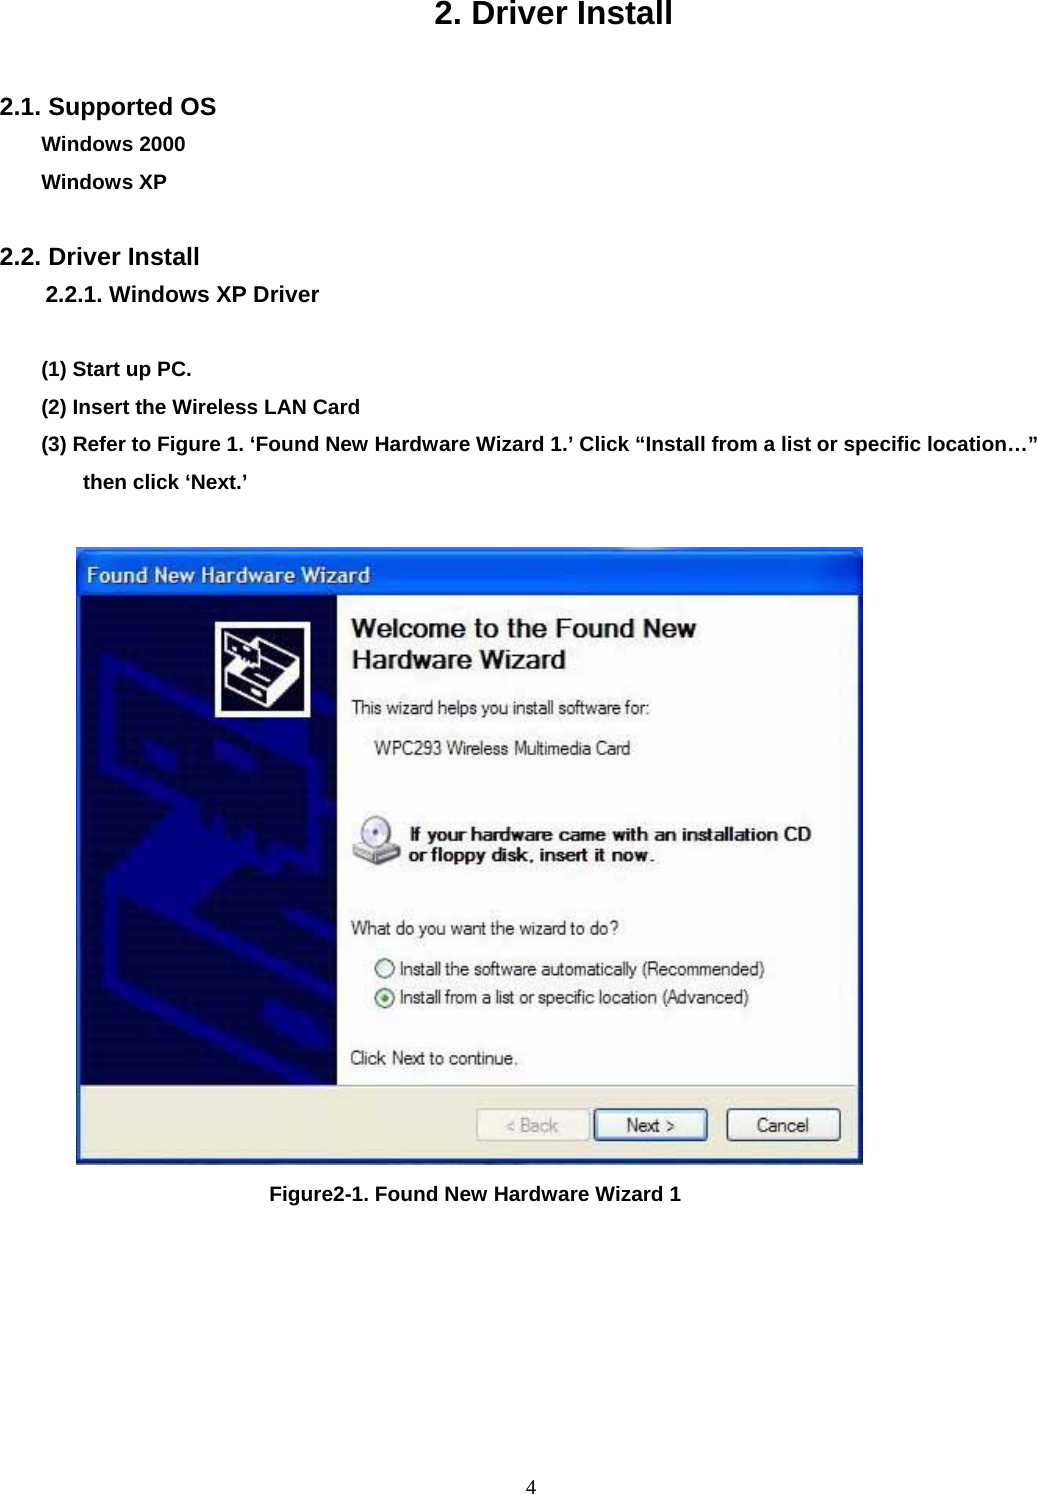  2. Driver Install  2.1. Supported OS Windows 2000 Windows XP  2.2. Driver Install 2.2.1. Windows XP Driver  (1) Start up PC. (2) Insert the Wireless LAN Card (3) Refer to Figure 1. ‘Found New Hardware Wizard 1.’ Click “Install from a list or specific location…” then click ‘Next.’                              Figure2-1. Found New Hardware Wizard 1                             4